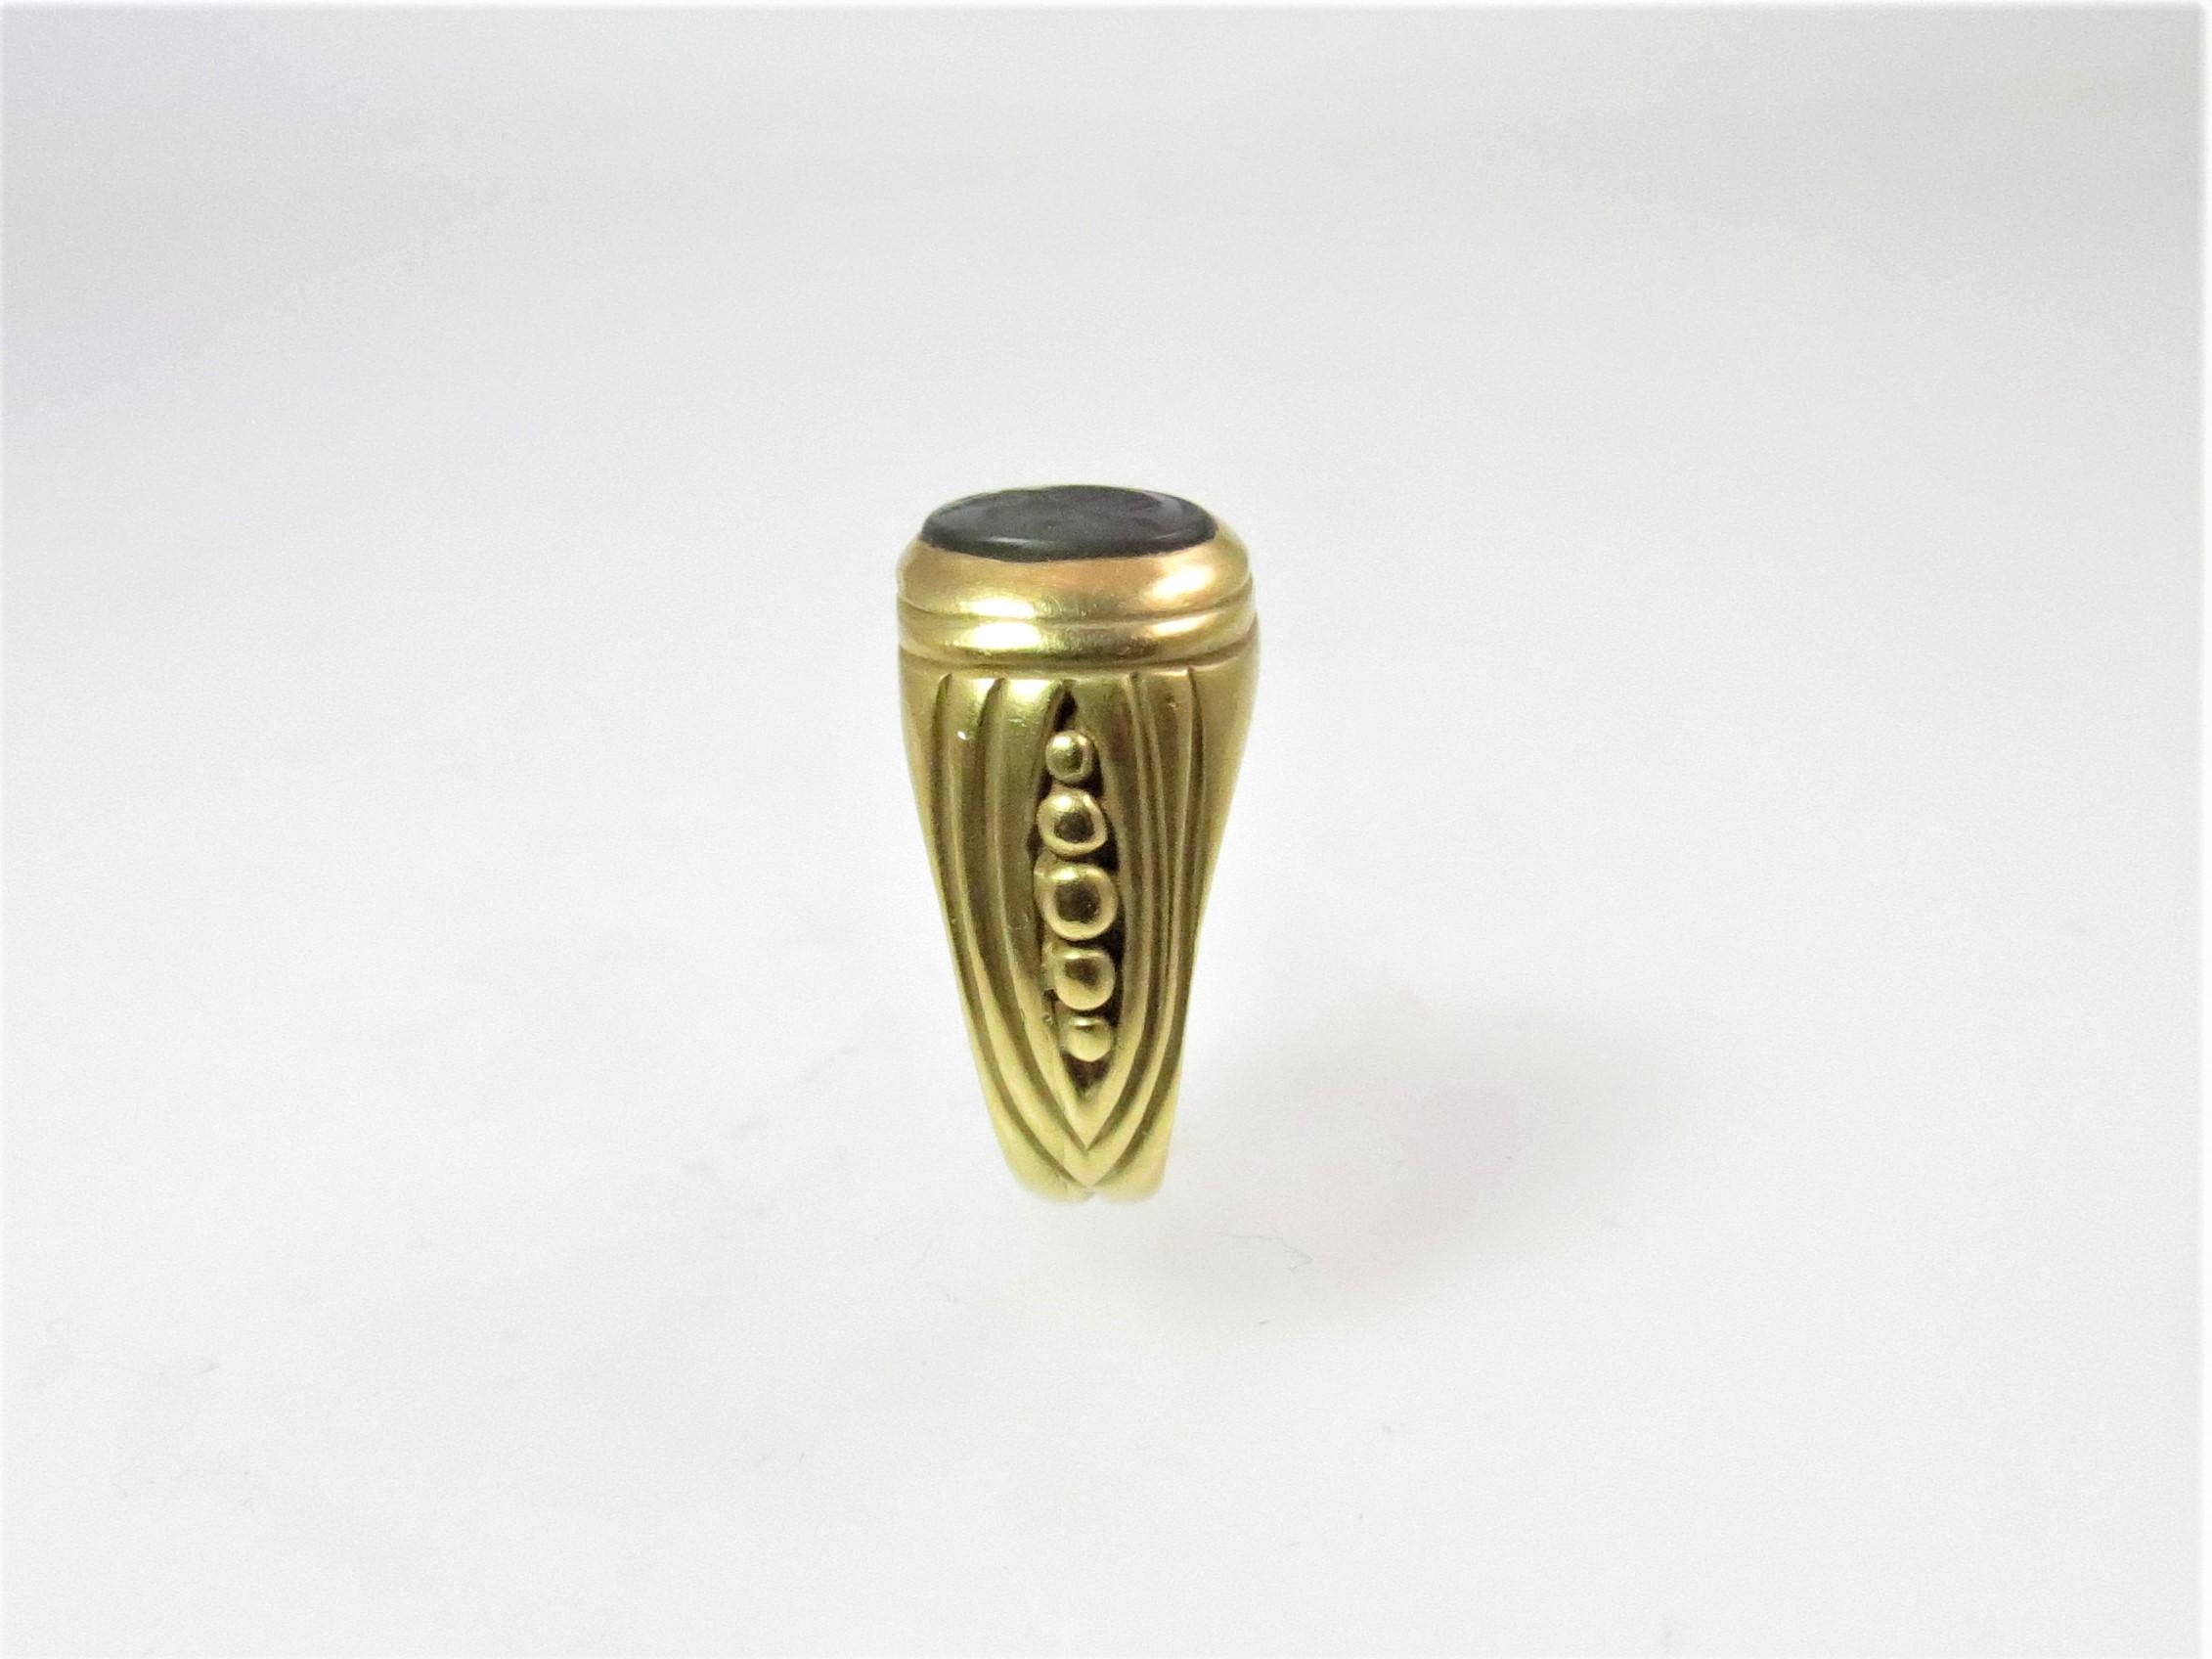 Oval Cut 18 Karat Yellow Gold Ring with Carved Black Onyx Intaglio